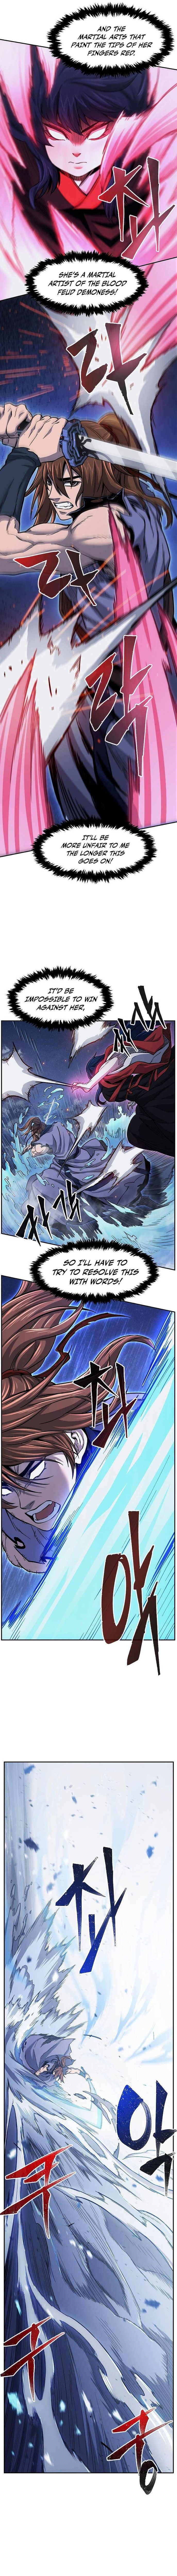 Absolute Sword Sense Chapter 23 page 8